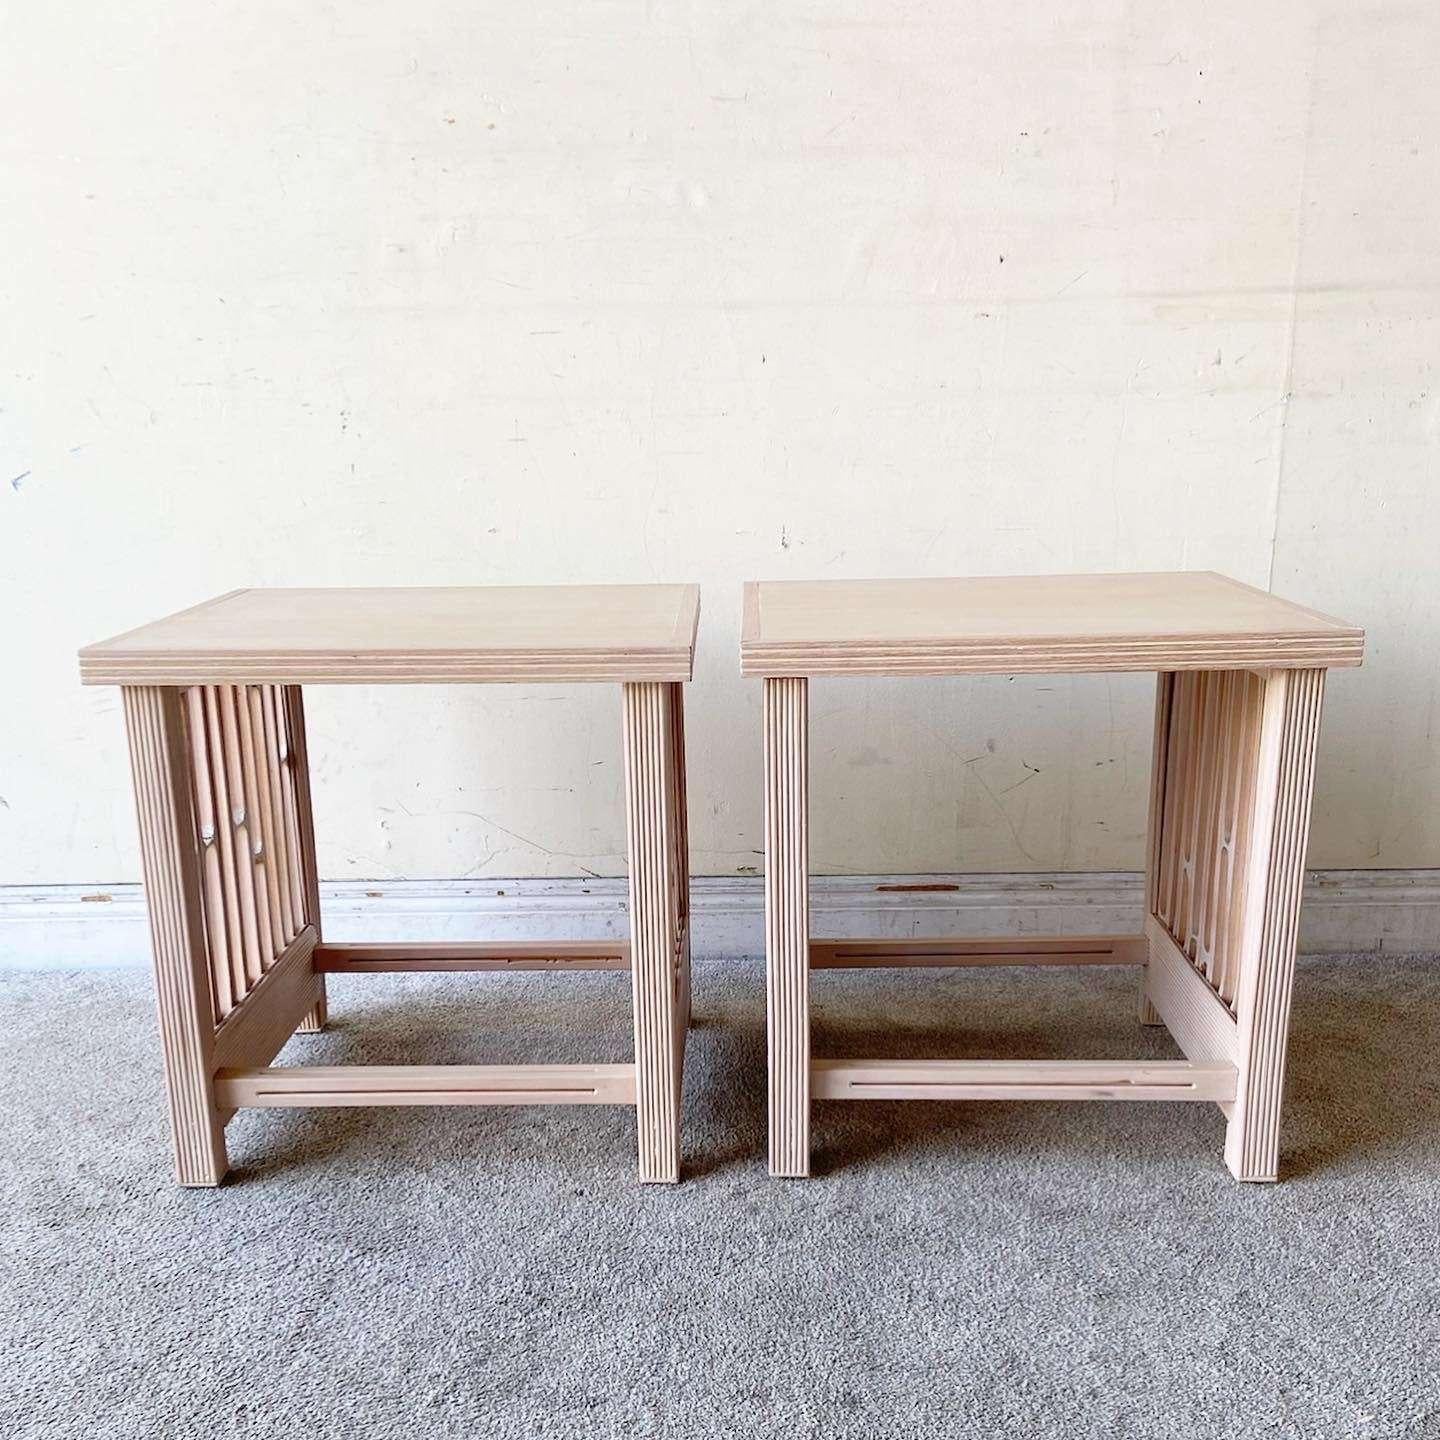 Exceptional pair of vintage organic modern side tables. Each feature a white washed finish with a pencil reed frame and sculpted wooden sides.